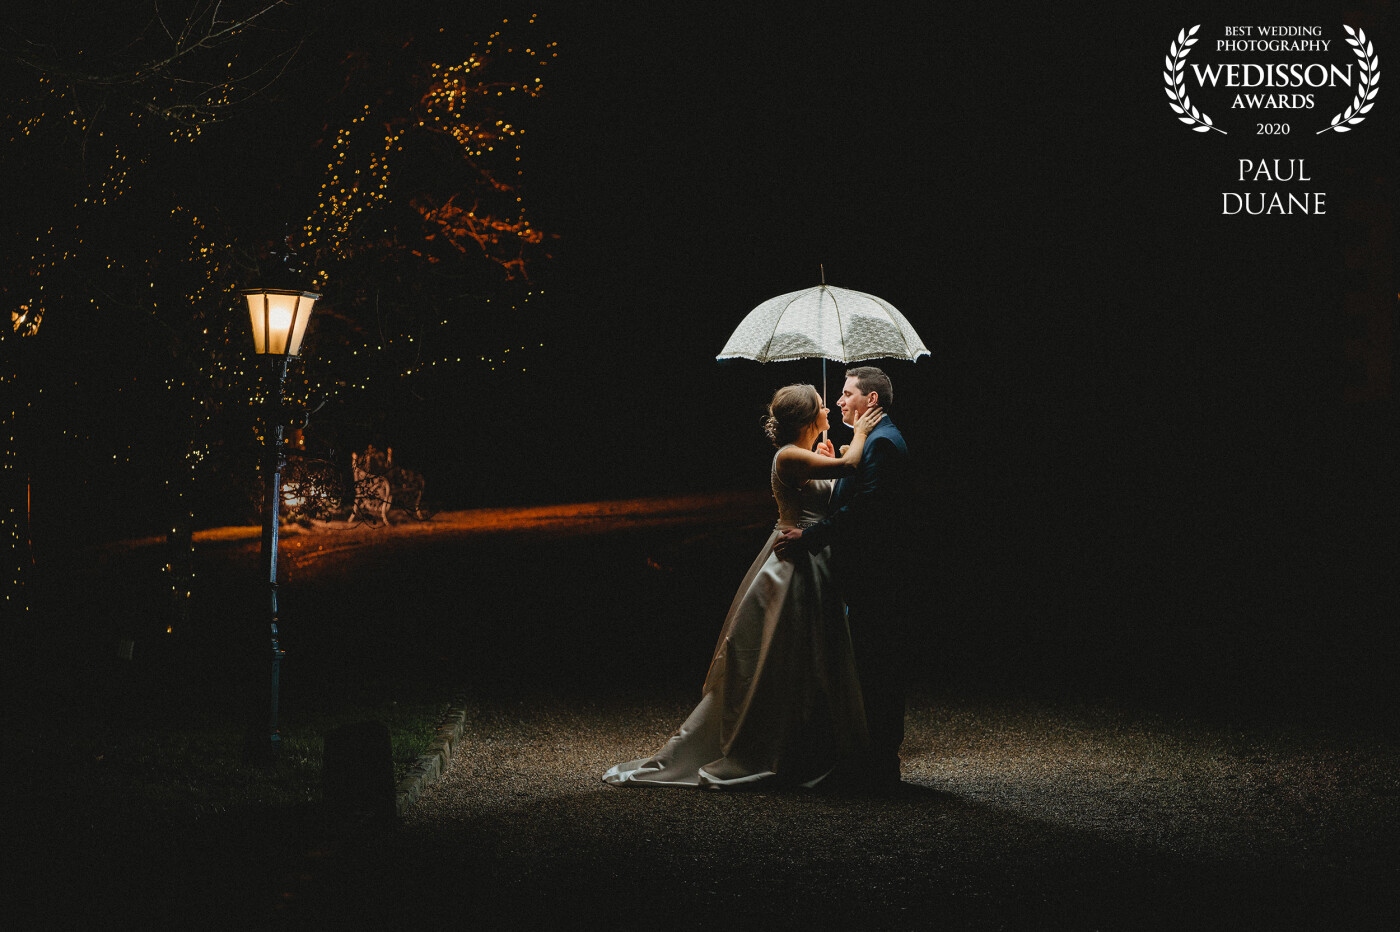 Night time shot taken on a cold February night, but the cold didn't phase these two love birds one bit, they're clearly all loved up at the beautiful Clonabreany House in County Meath, Ireland.